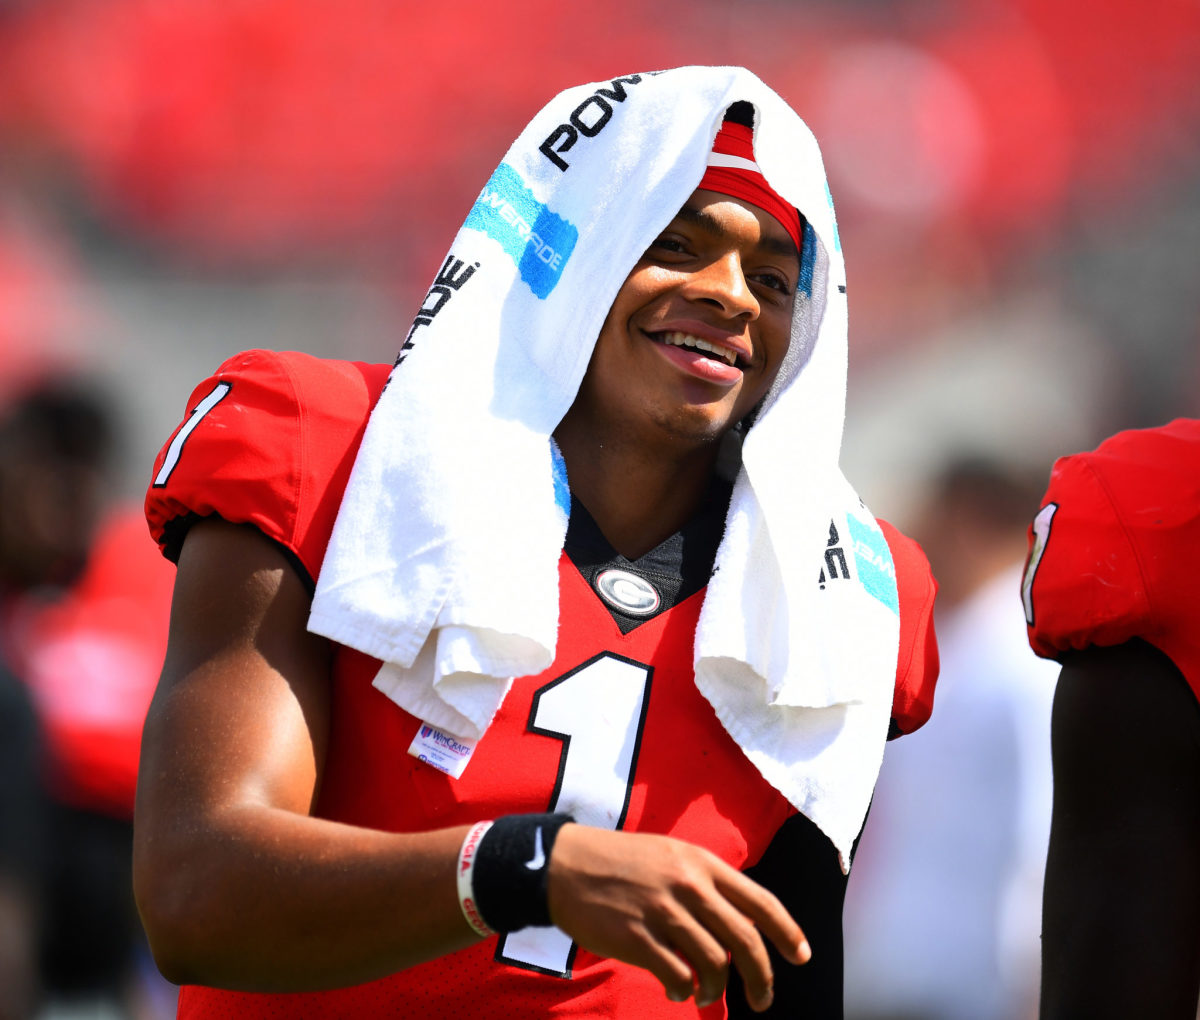 justin fields smiles during a game for georgia